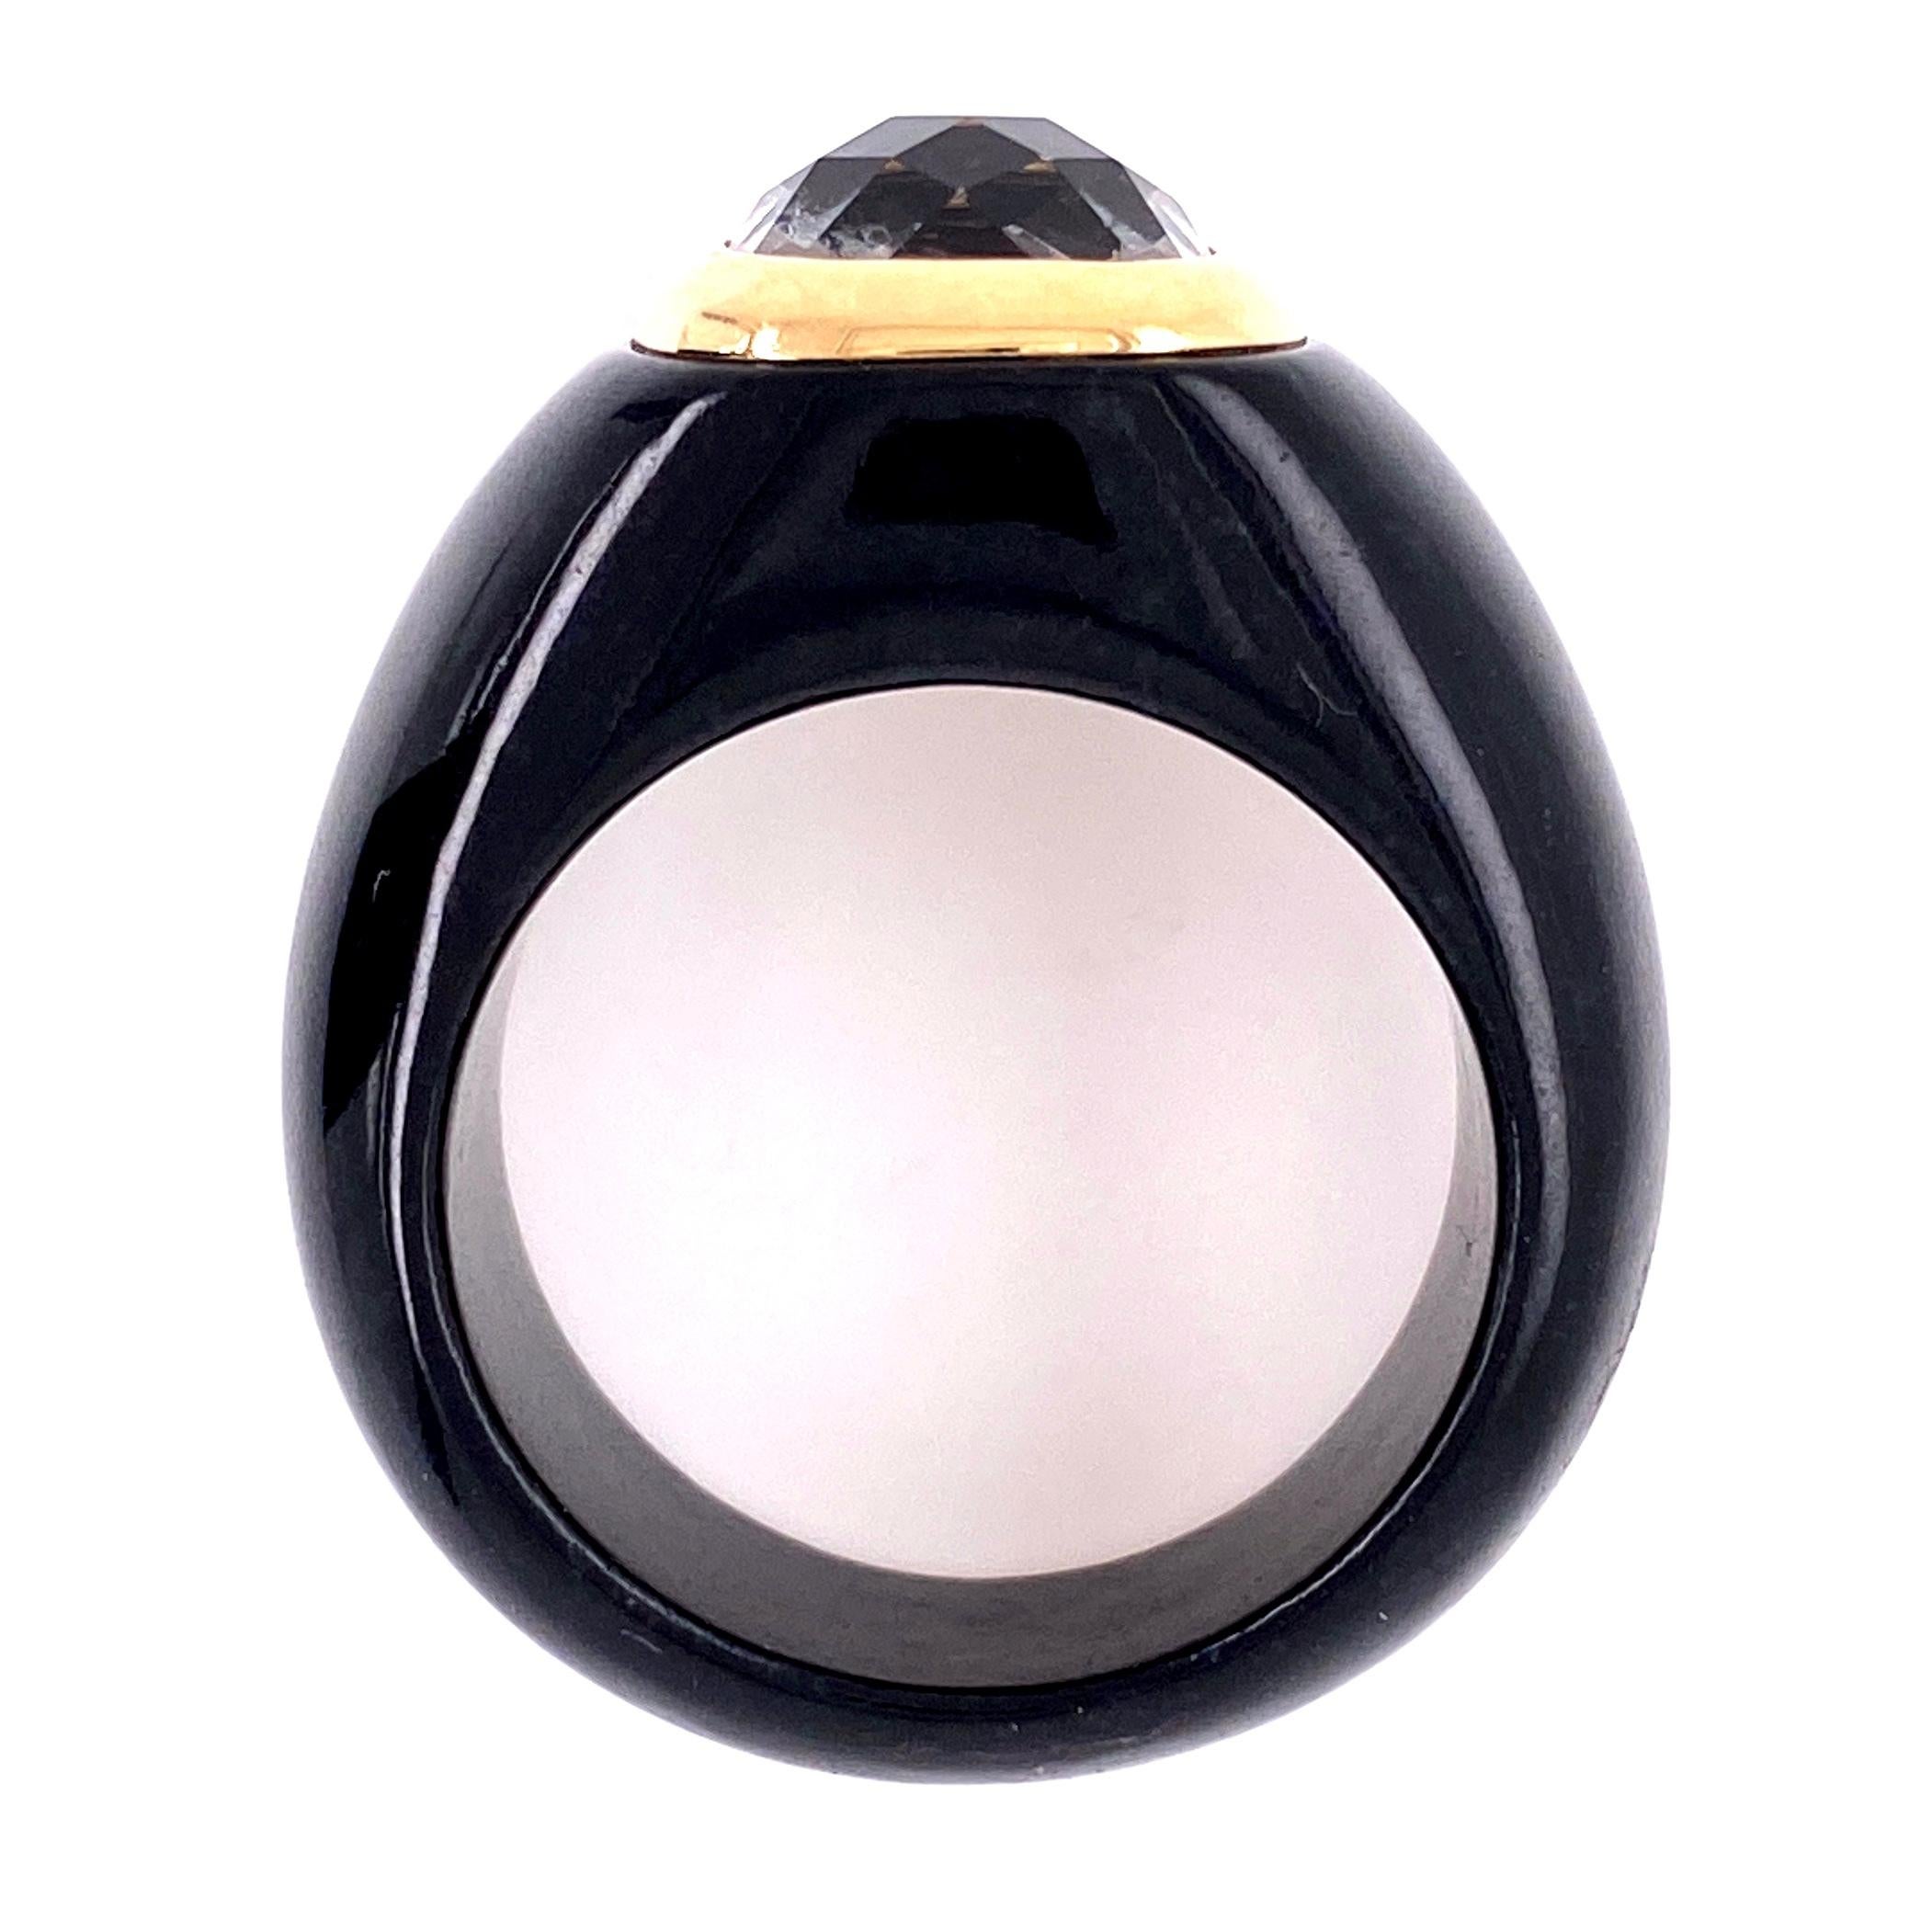 Simply Beautiful! Quartz and Black Resin Gold Cocktail Statement Ring, centering a 12.2 Carat Checker-board Quartz; Black Resin and 14 Karat Yellow Gold. ring size 6.75. The ring is in excellent condition, recently professionally cleaned and